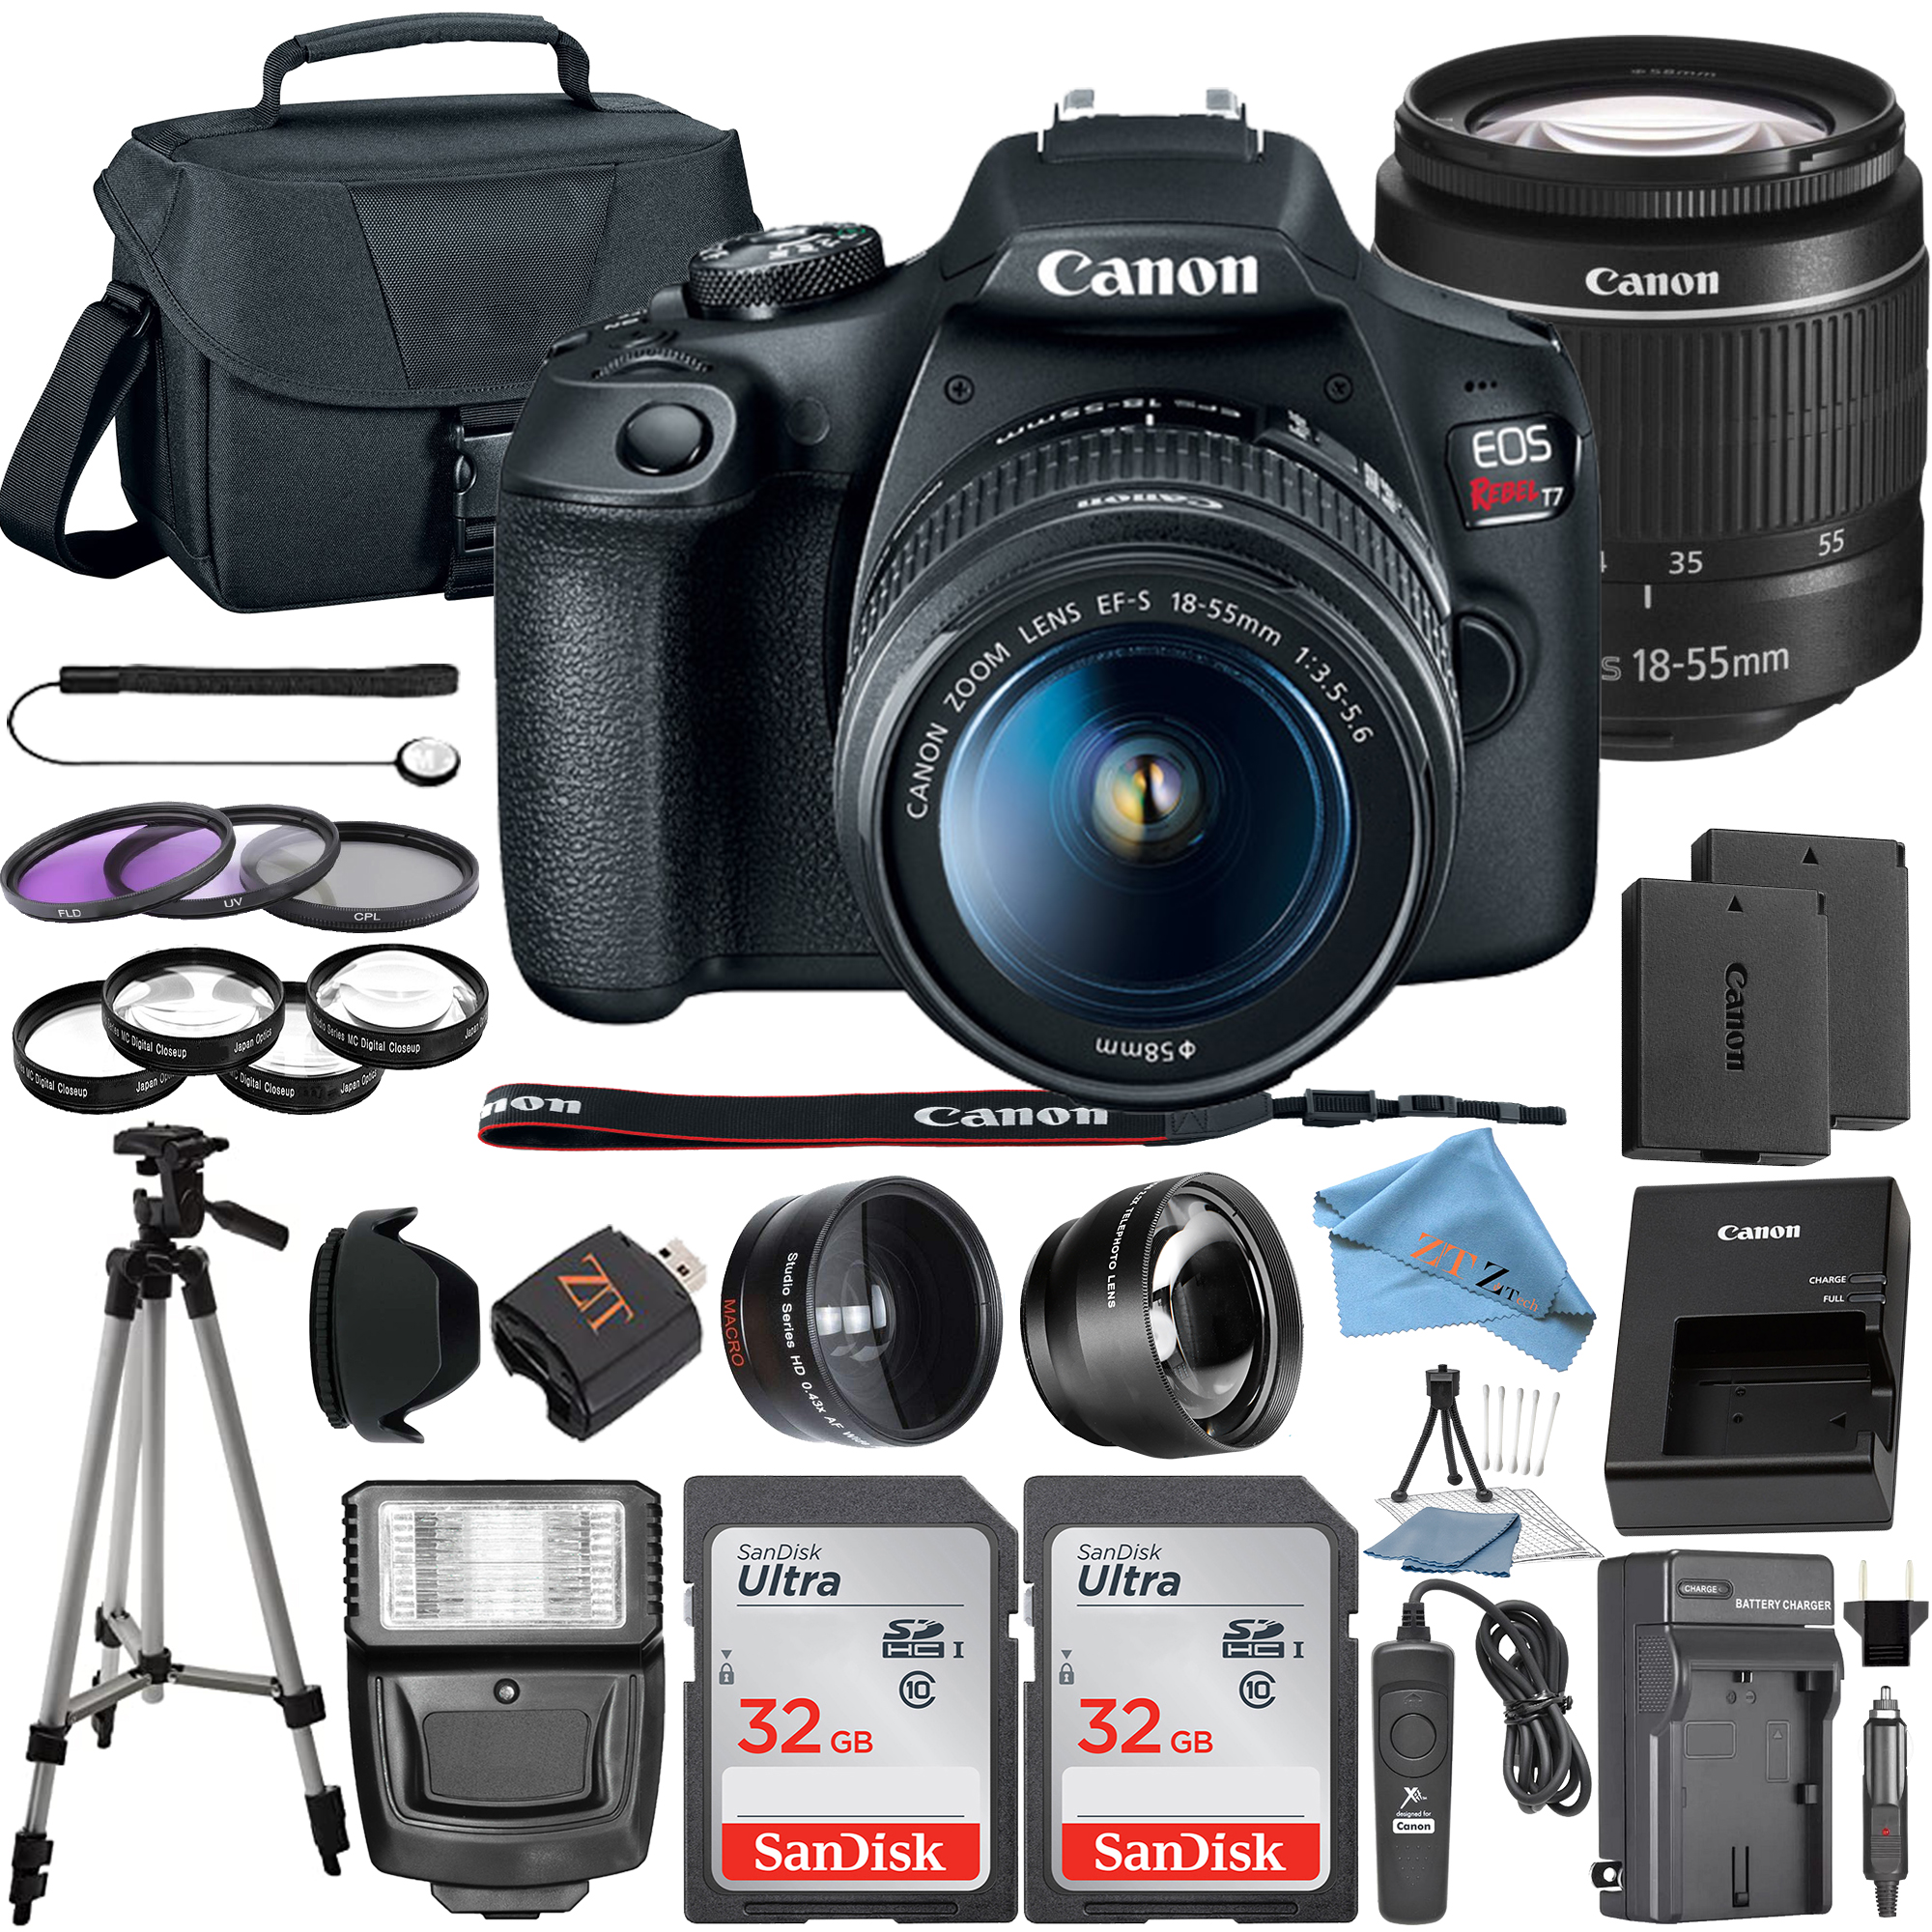 Canon EOS Rebel T7 DSLR Camera Kit with 18-55mm Lens + 2 Pcs SanDisk 32GB Memory Cards + Camera Case + ZeeTech Accessory